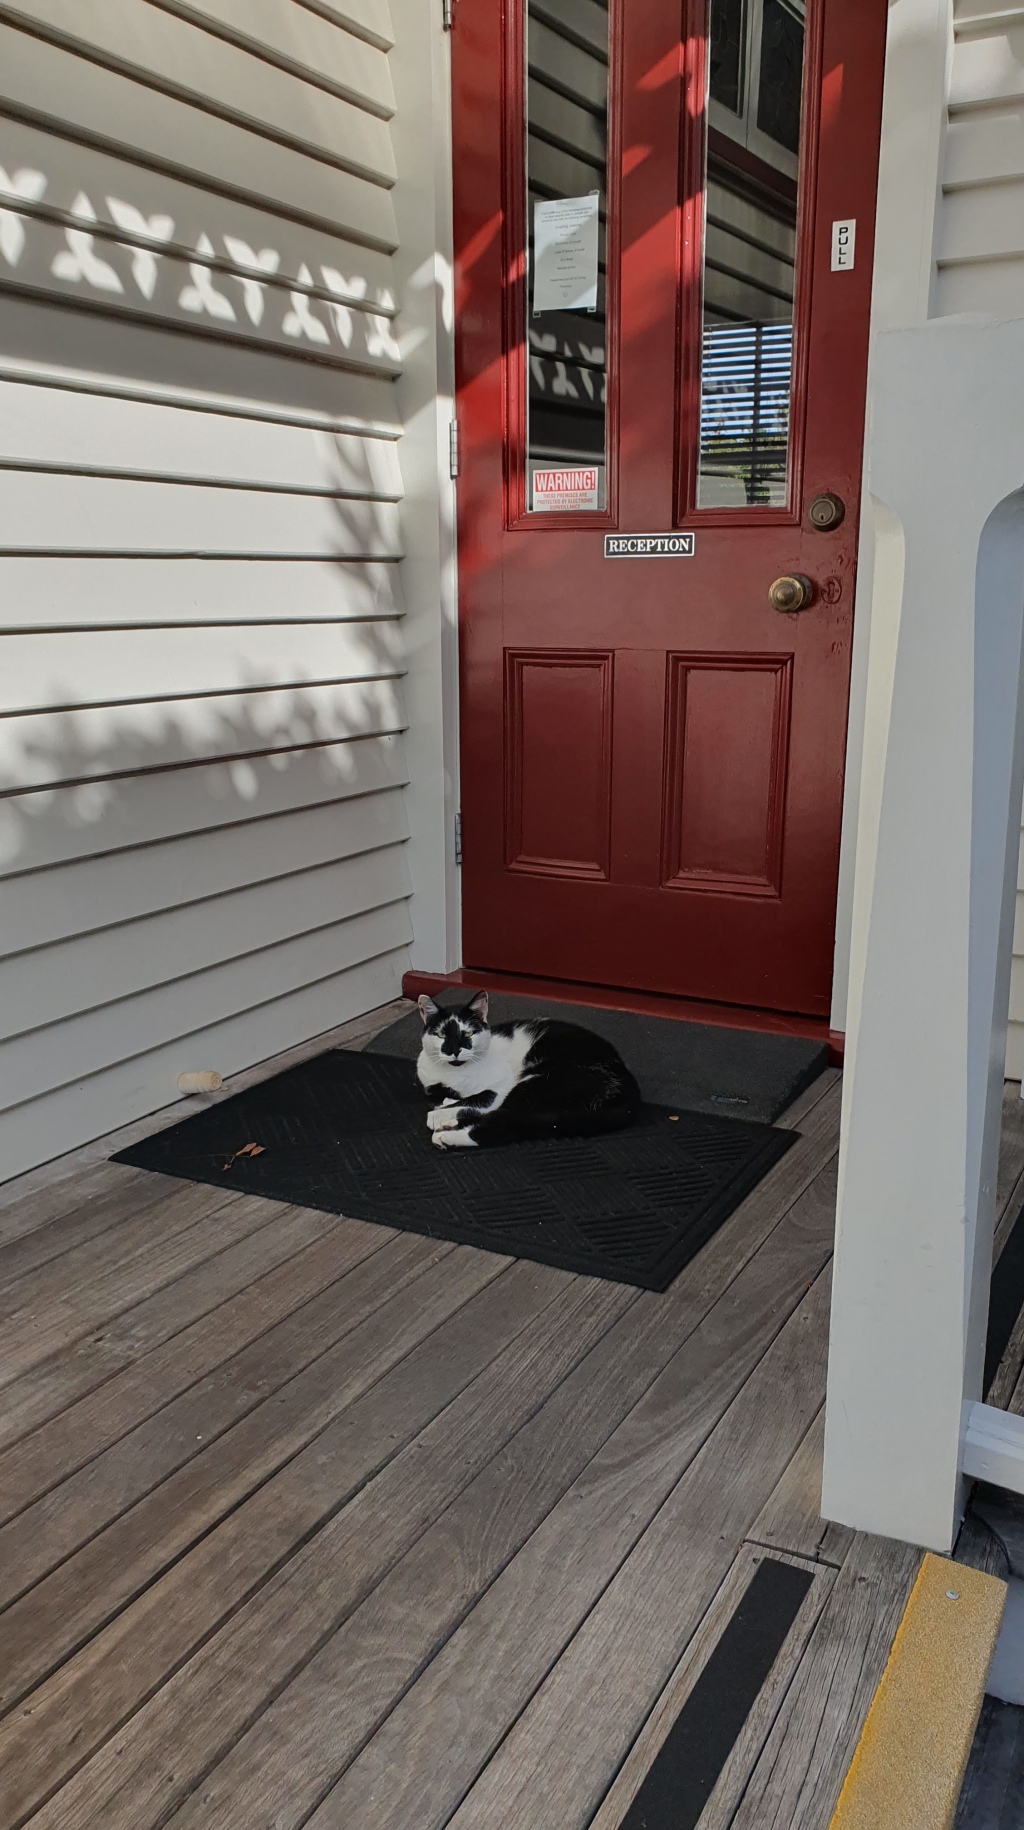 Black and White Cat on the welcome mat